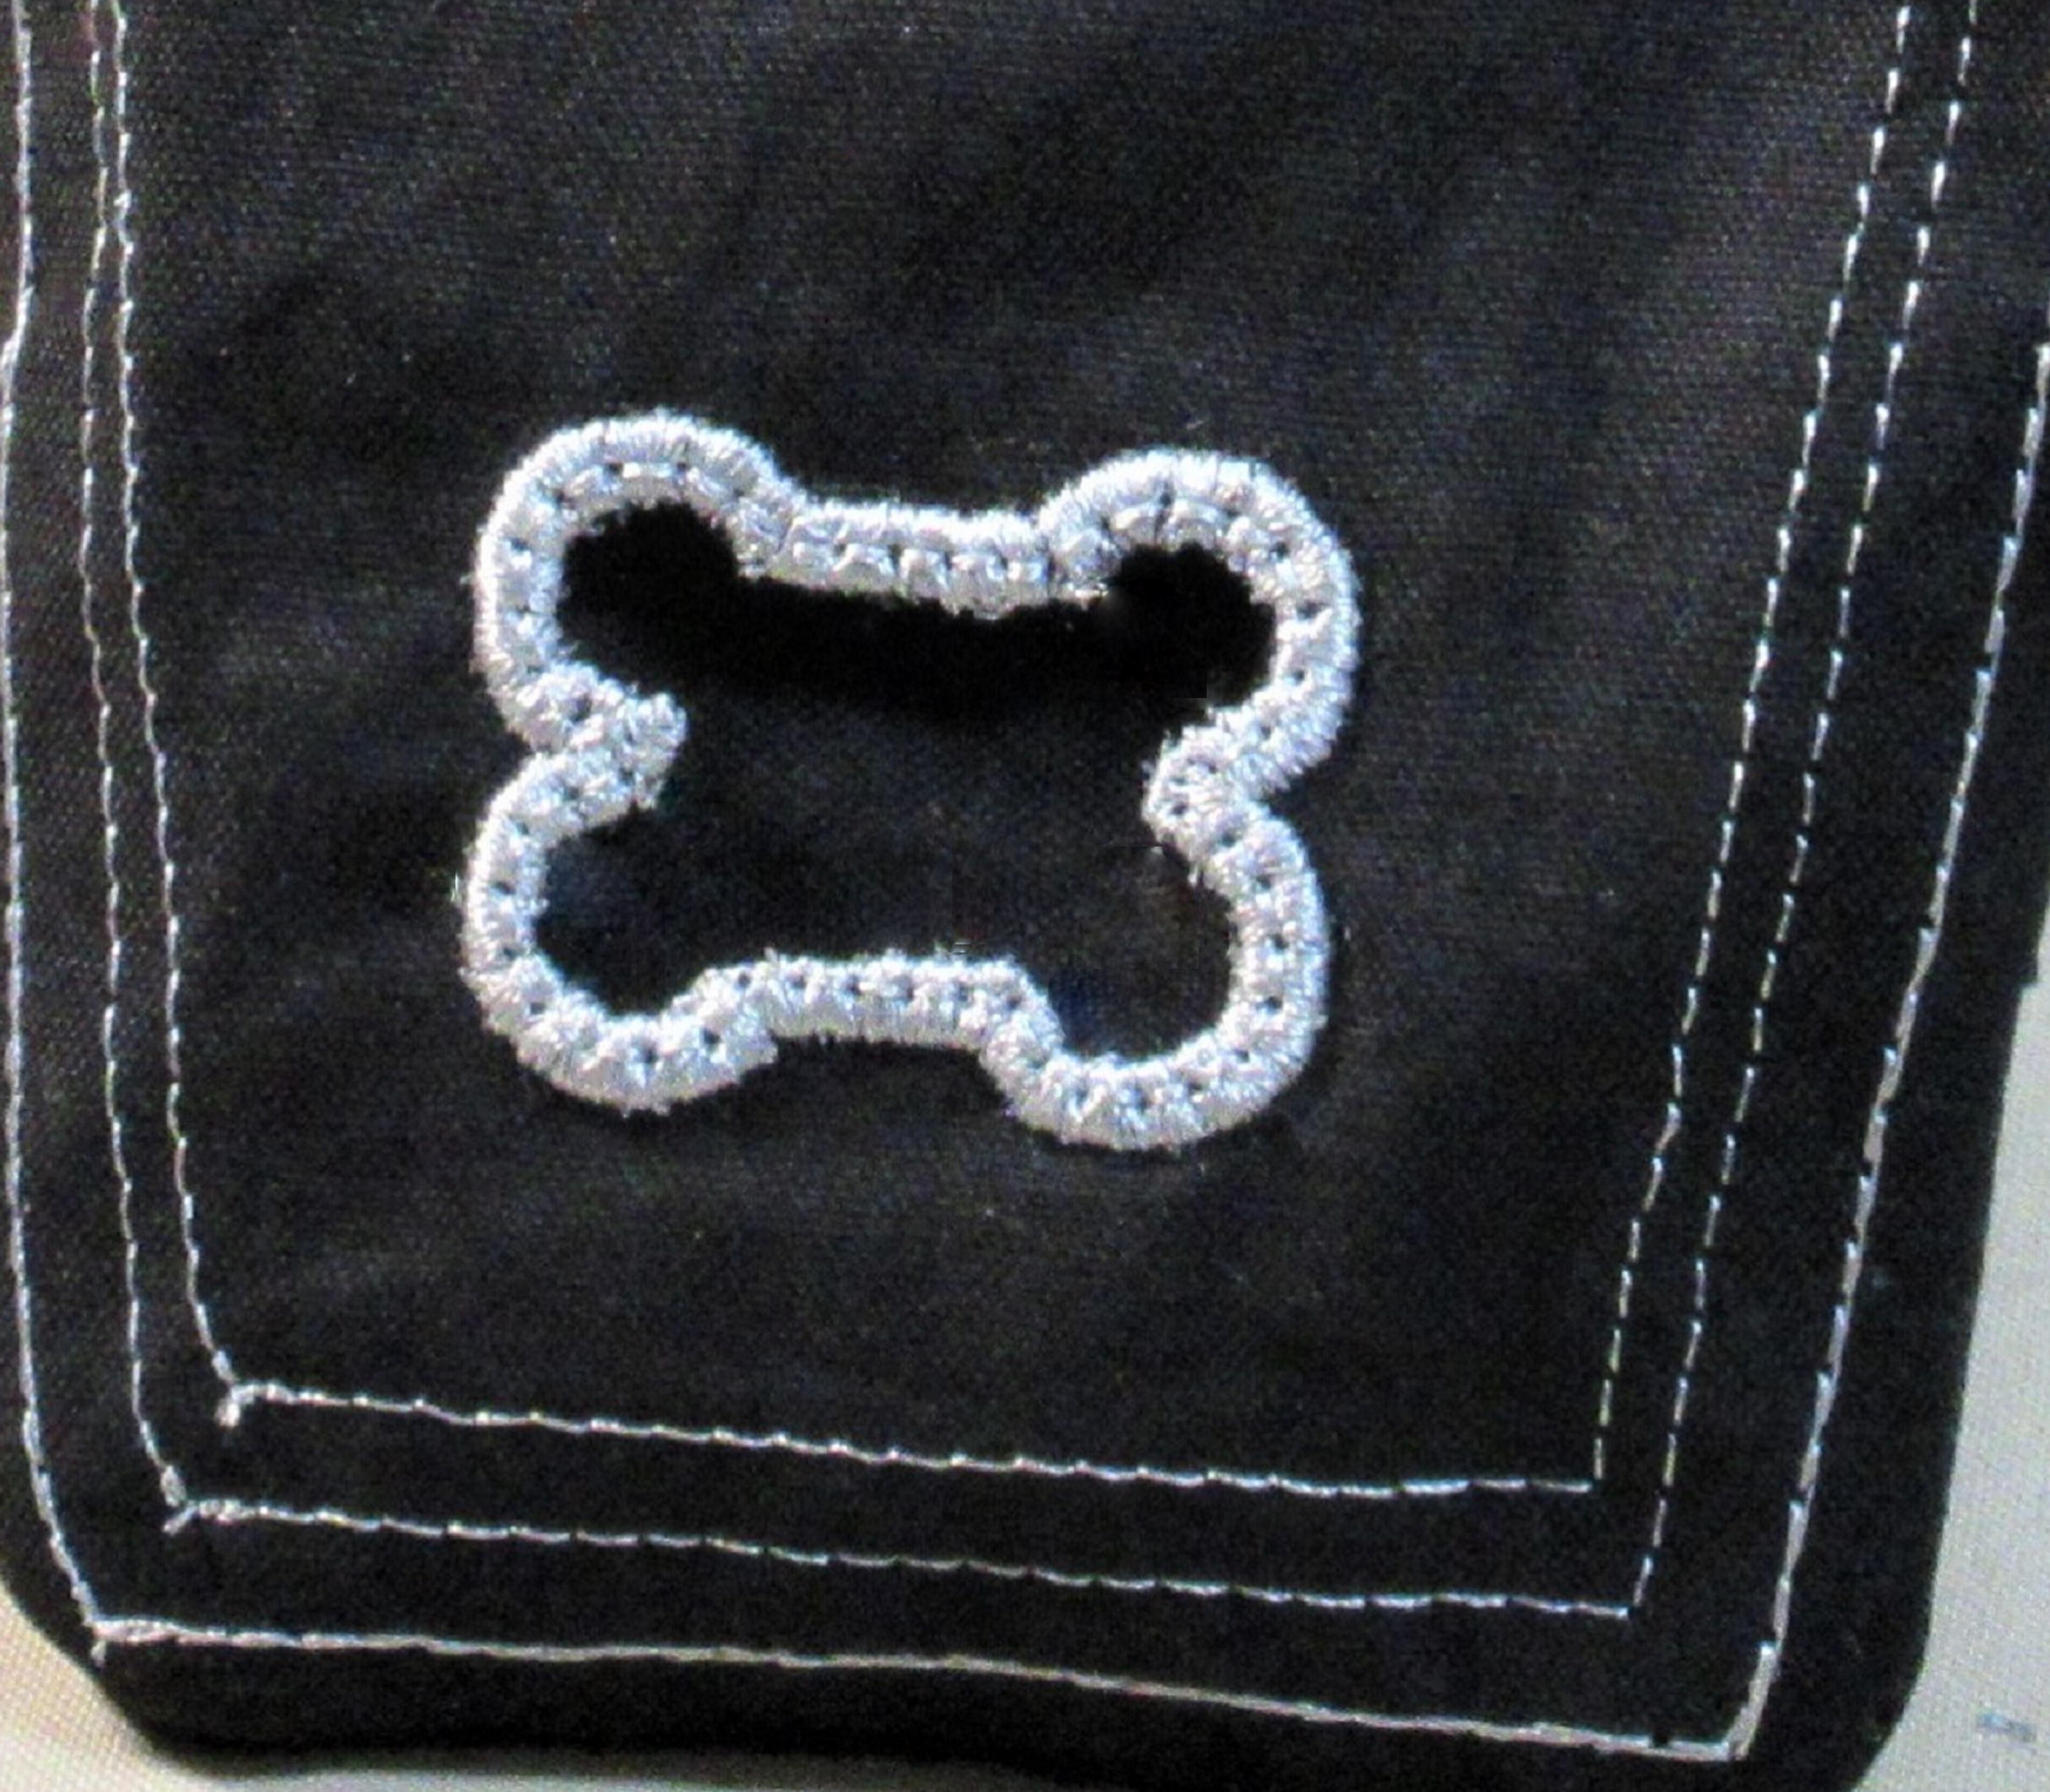 Coffin shaped dog poop bag holder or multipurpose bag with flames inside.  Made by A Fur Baby Favorite.  Pouch or purse